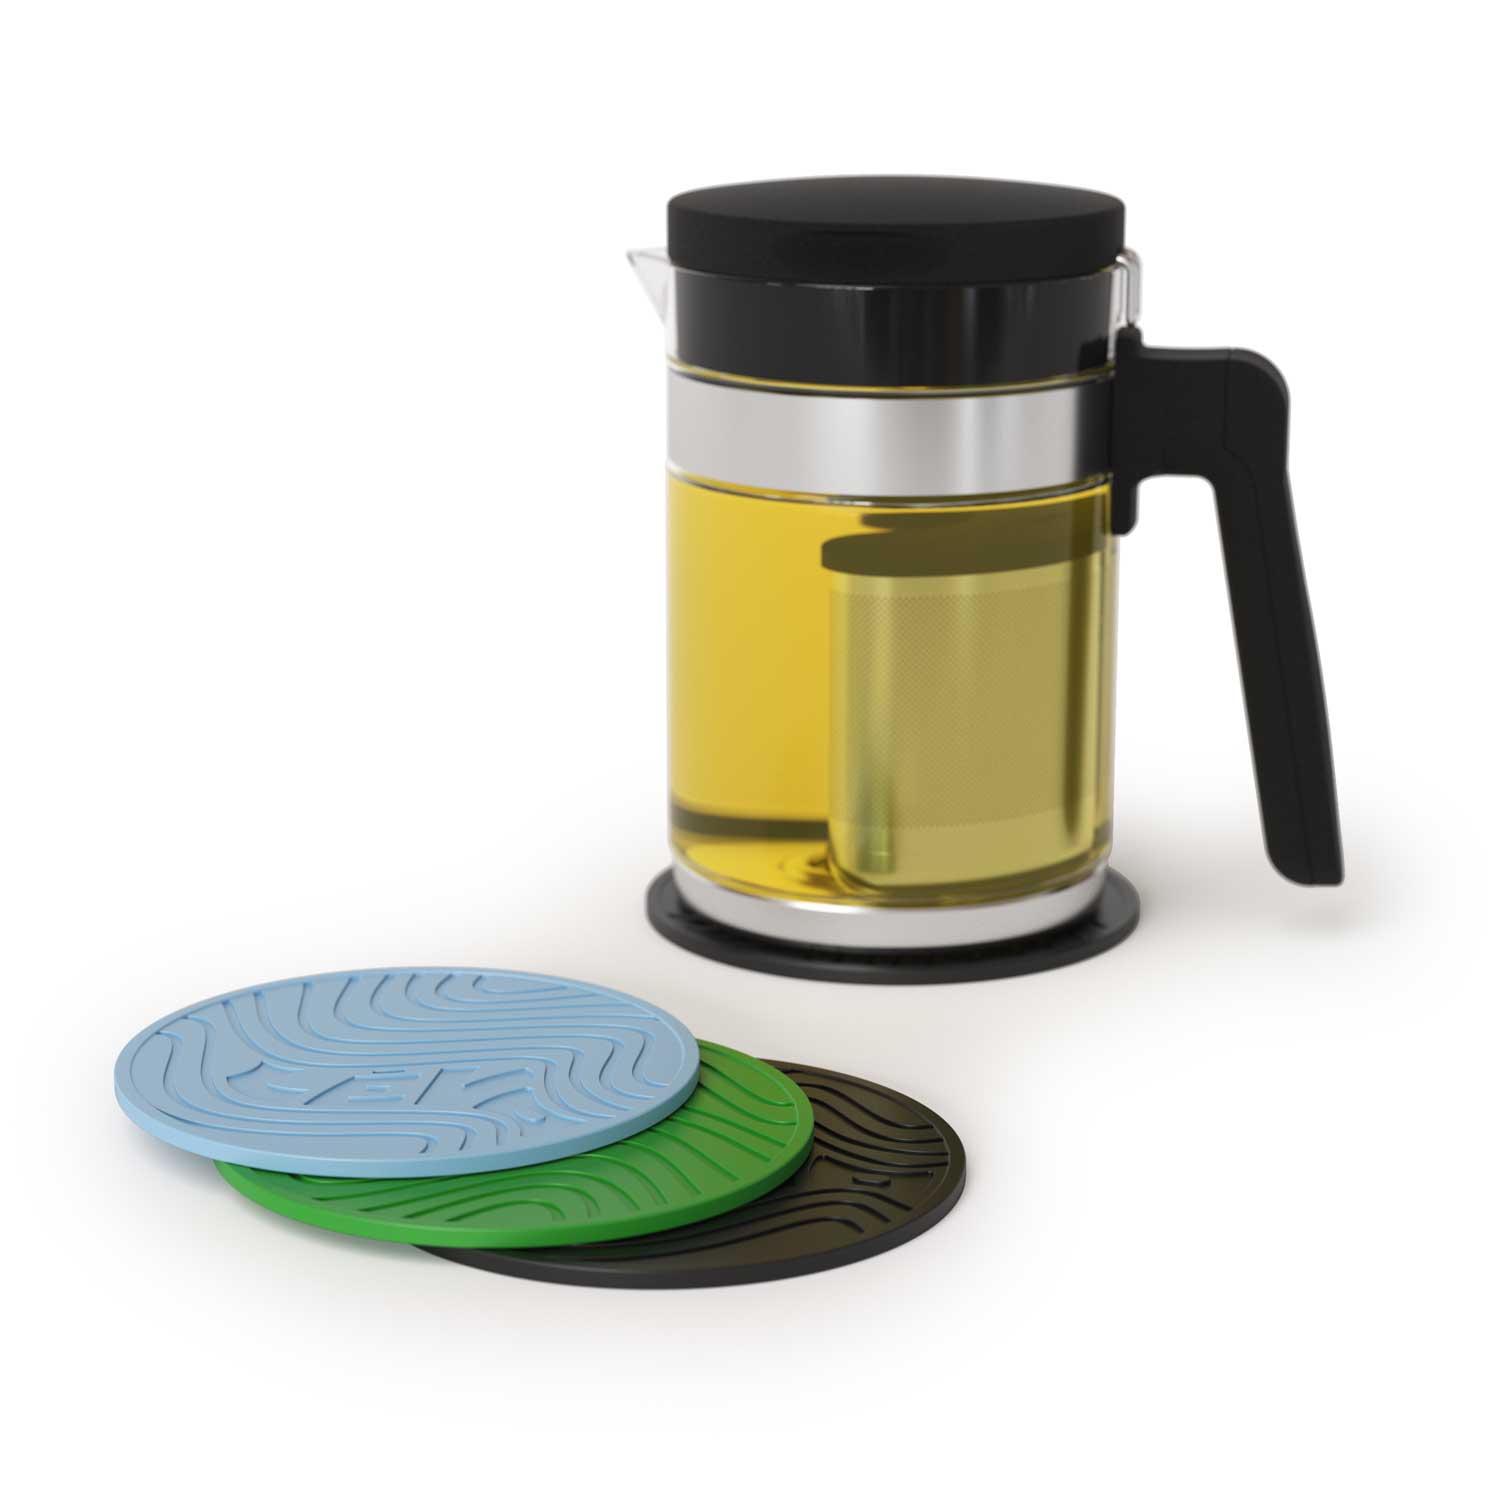 LĒVO Silicone Trivets in green, blue, and black shown with LĒVO C 